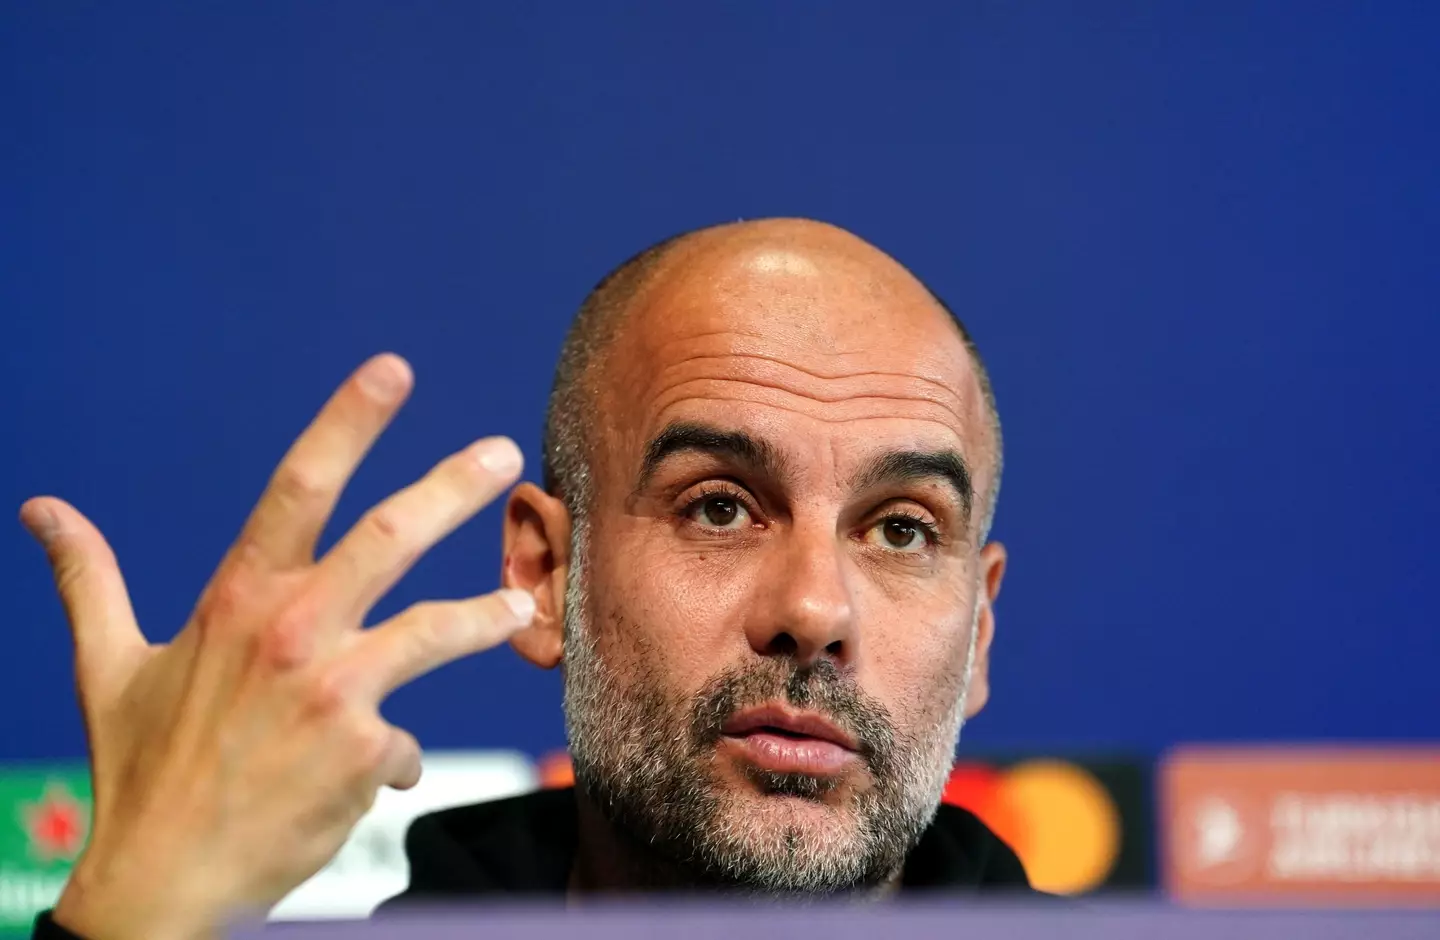 Guardiola clearly isn't happy with the treatment of his club. Image: Alamy